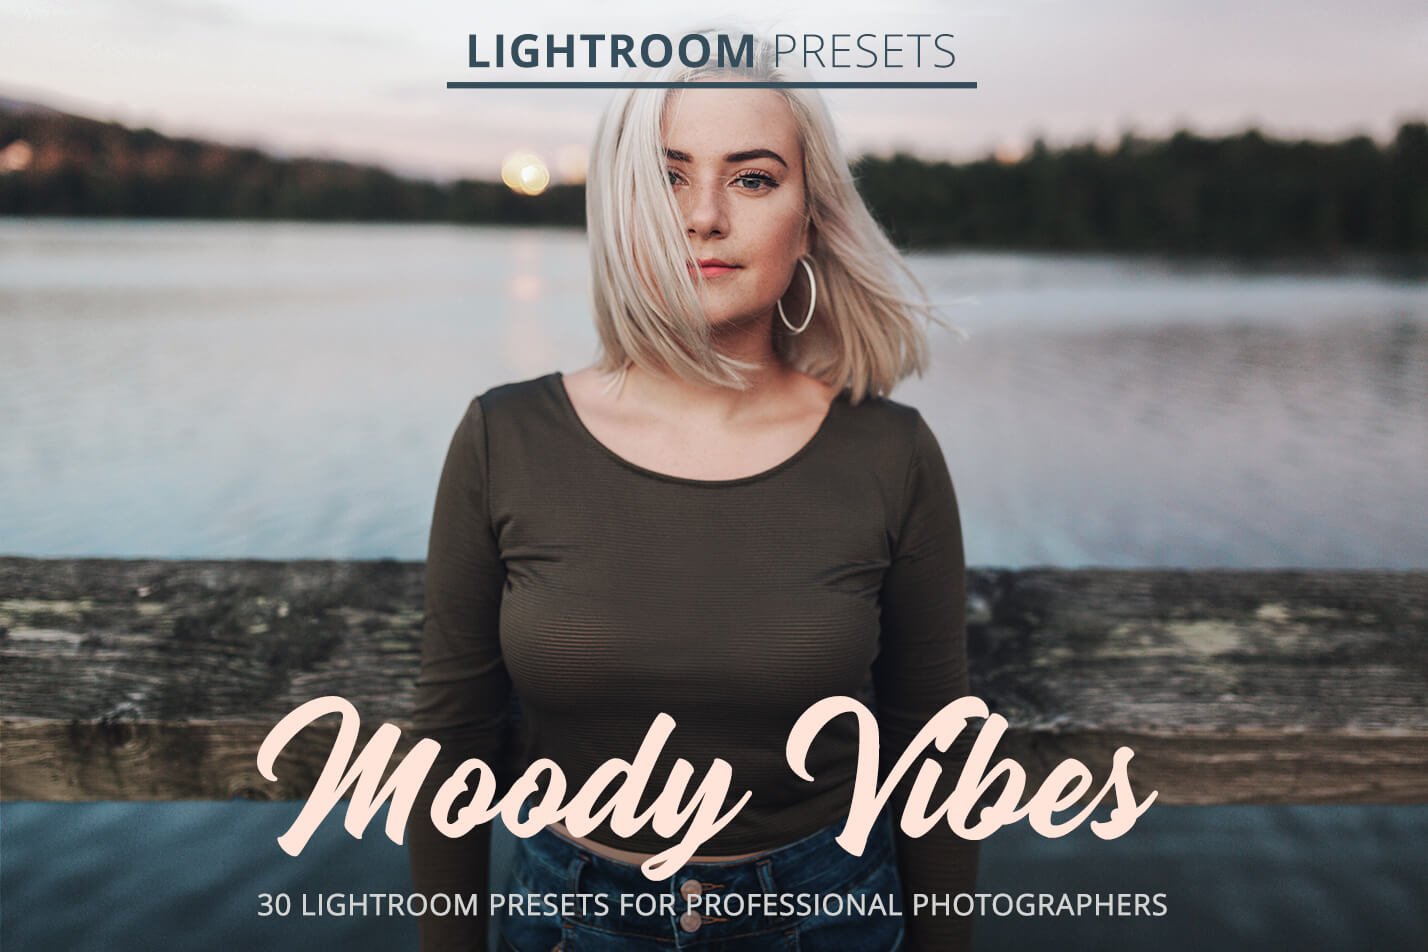 Moody Vibes Presetscover image.